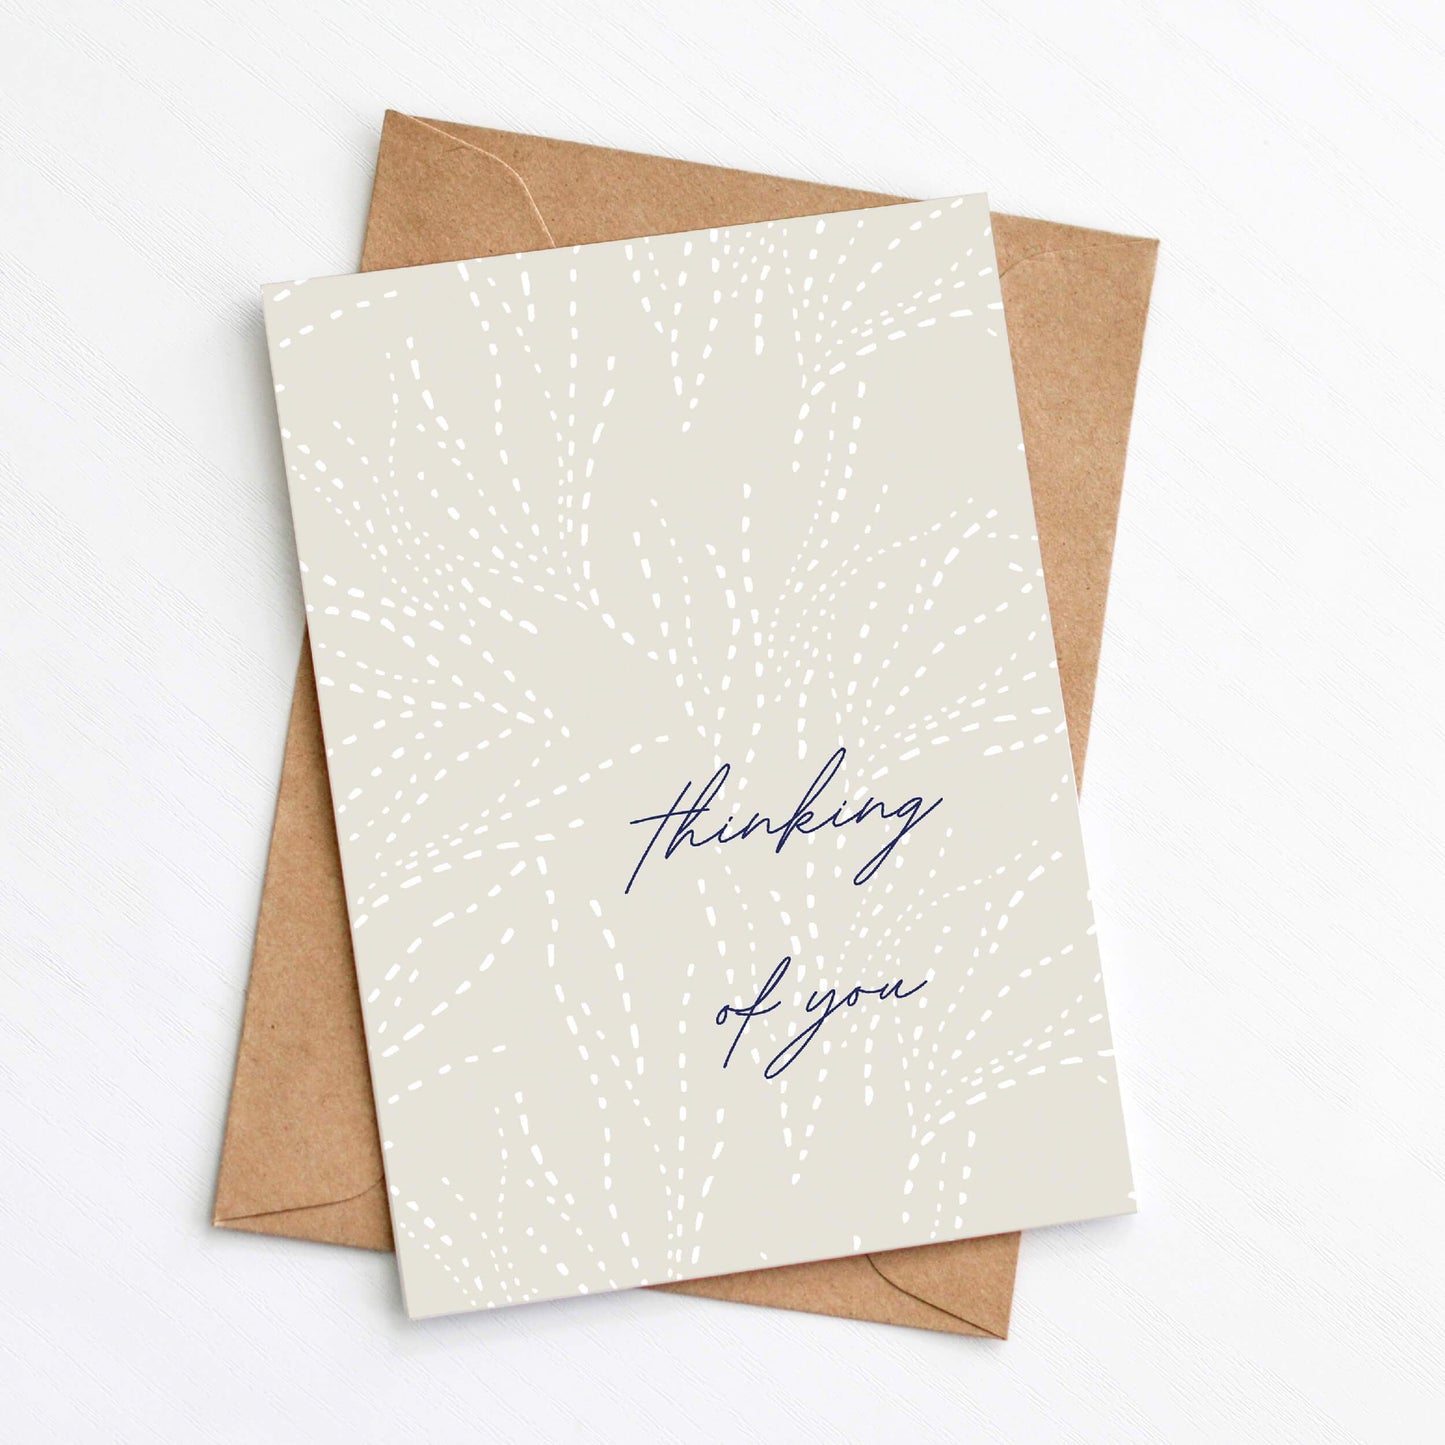 Greenwich Paper Studio Greetings Card Thinking Of You Card